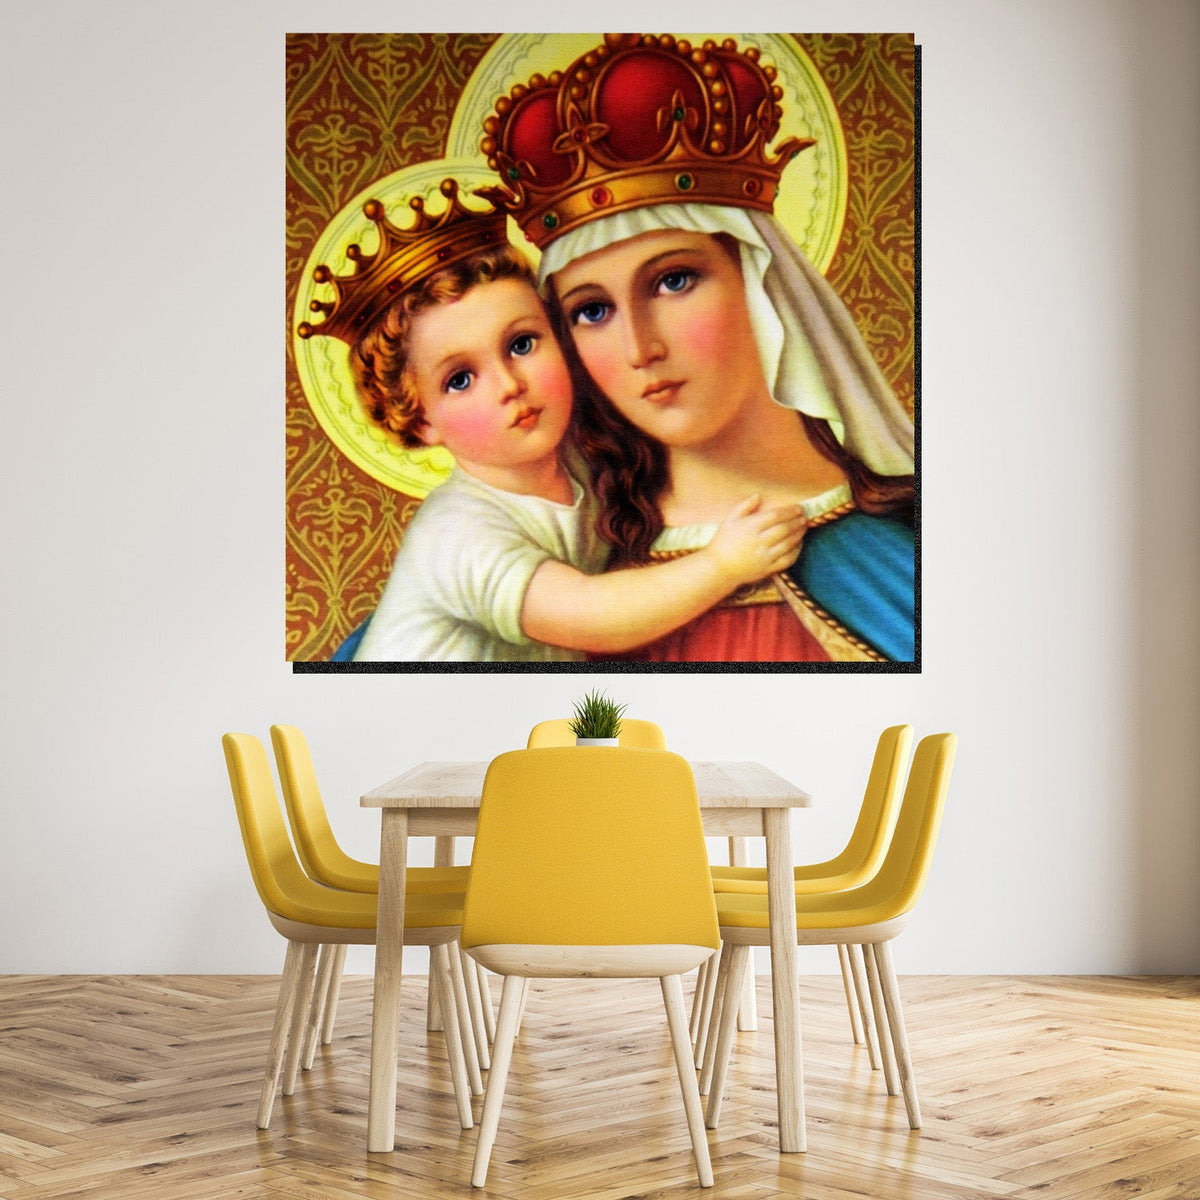 https://cdn.shopify.com/s/files/1/0387/9986/8044/products/BlessedVirginwithChildJesusCanvasArtprintStretched-4.jpg